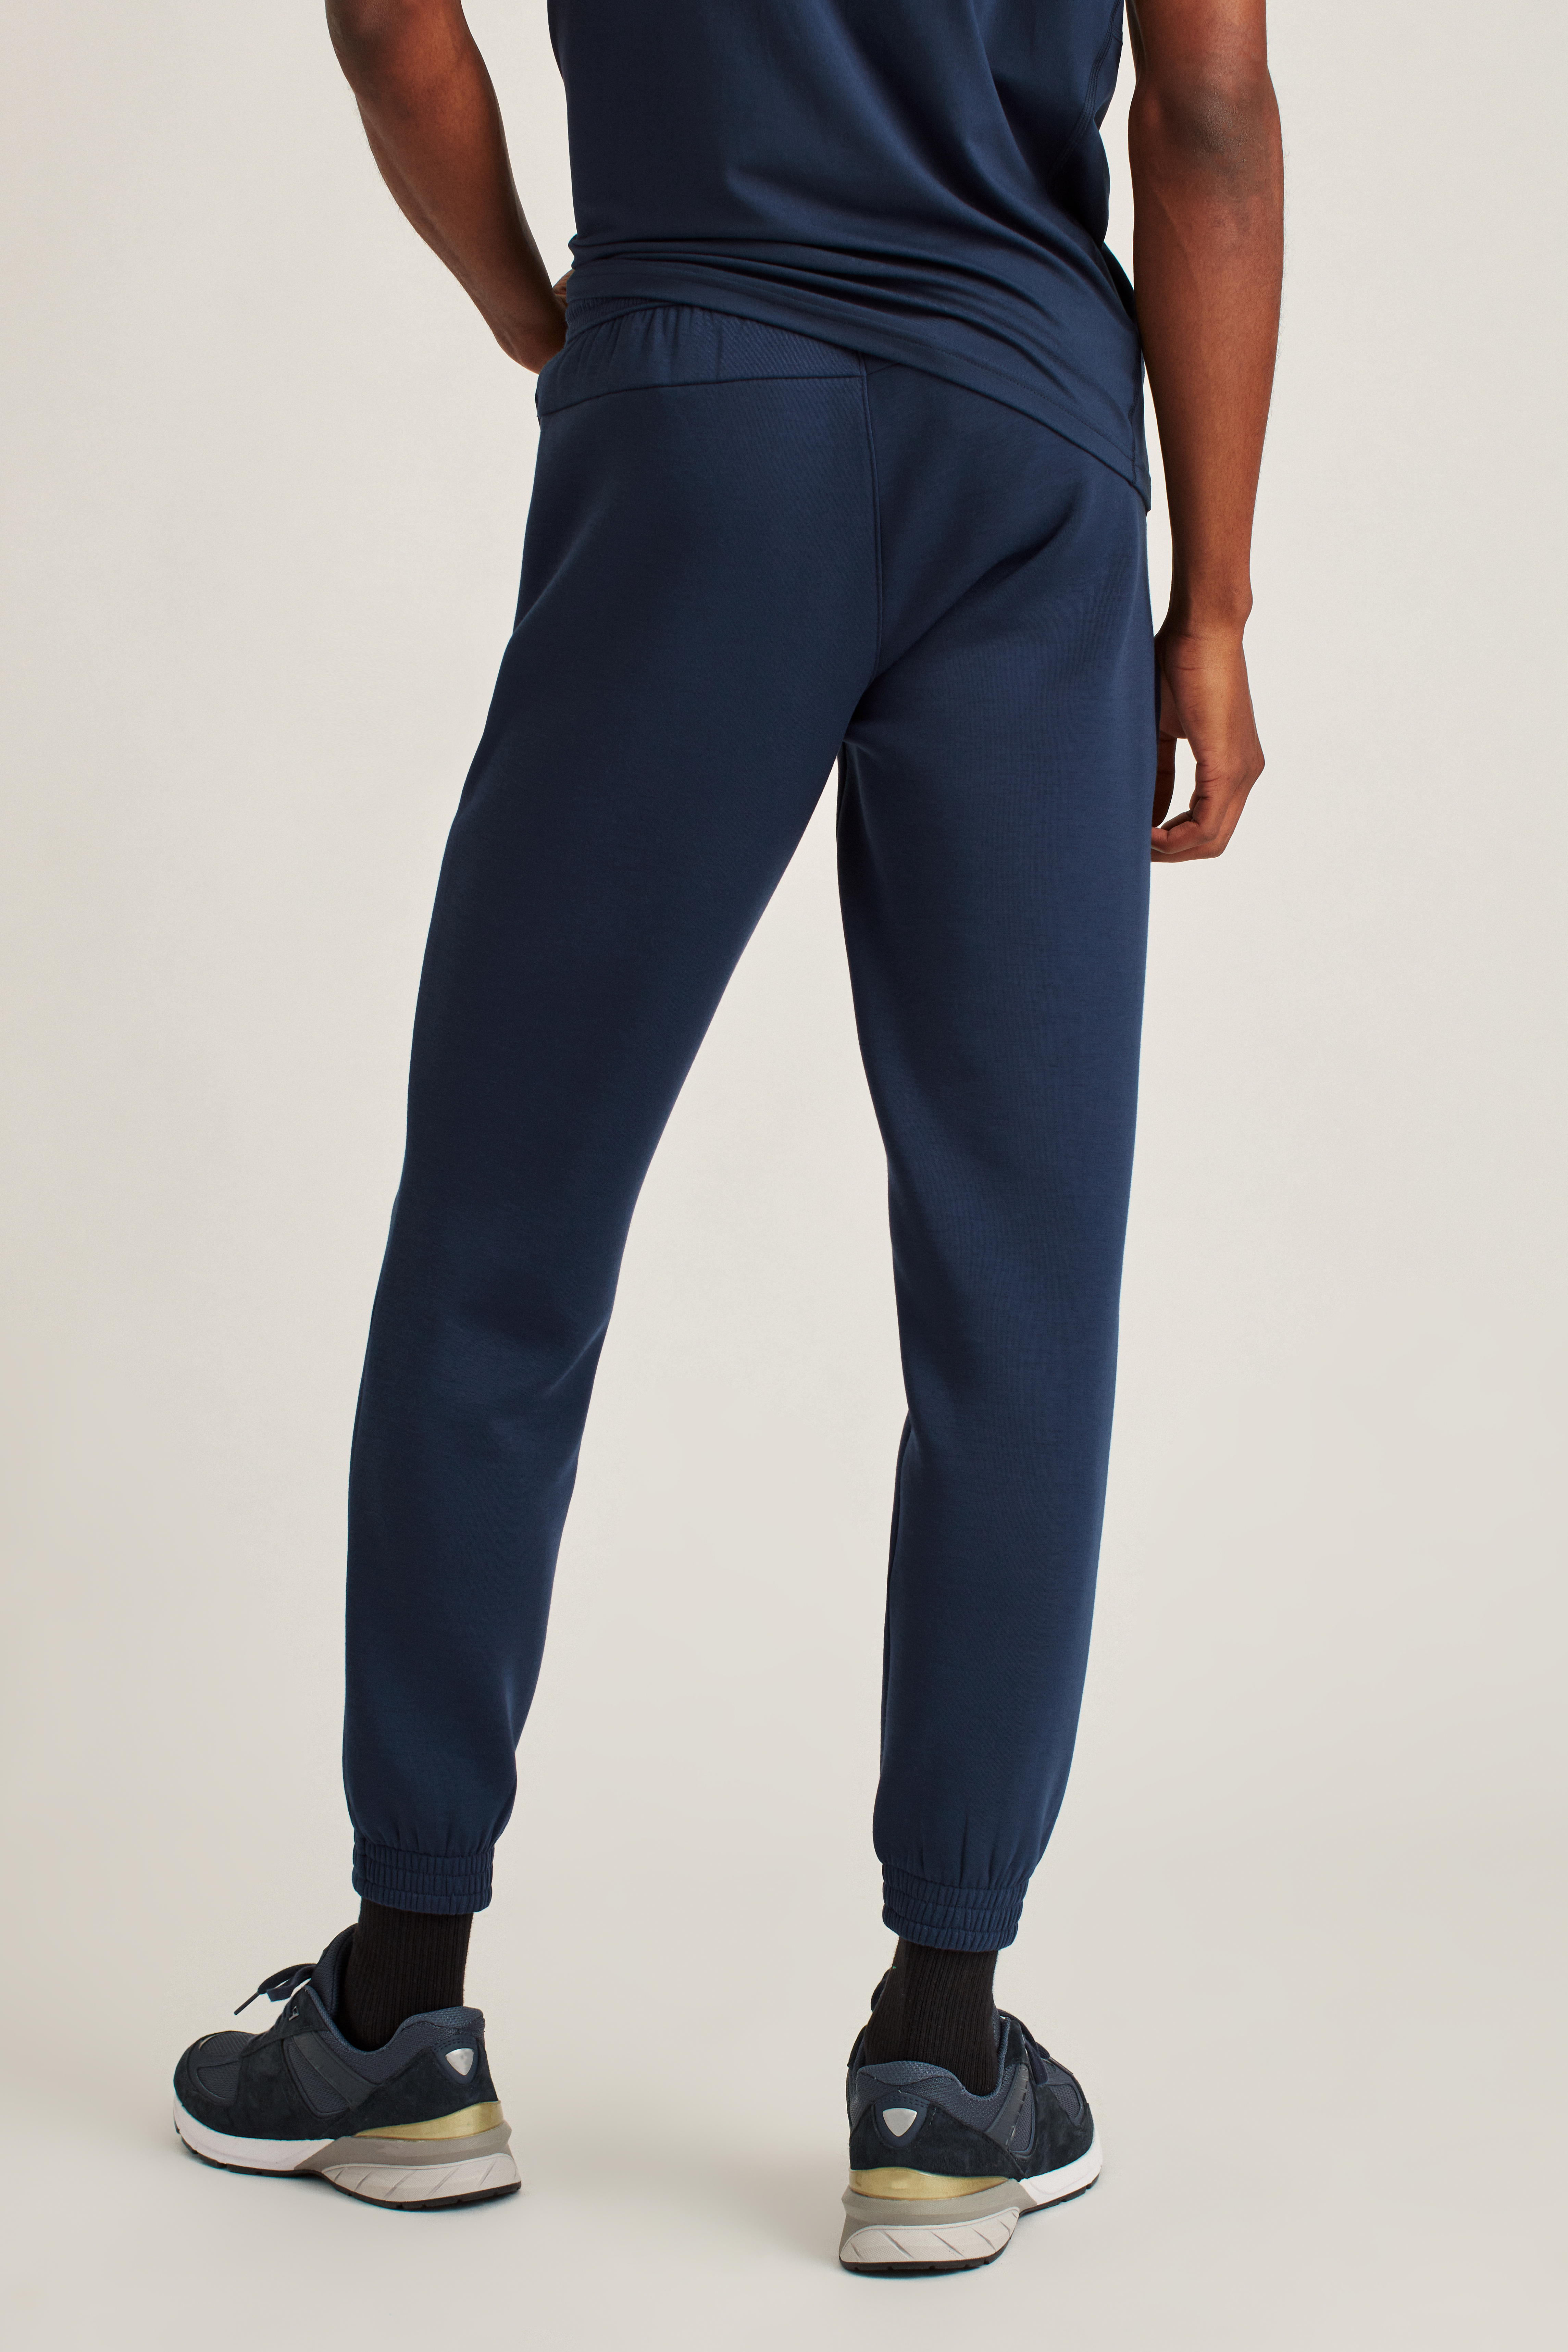 Lululemon athletica Adapted State High-Rise Fleece Jogger, Women's Joggers